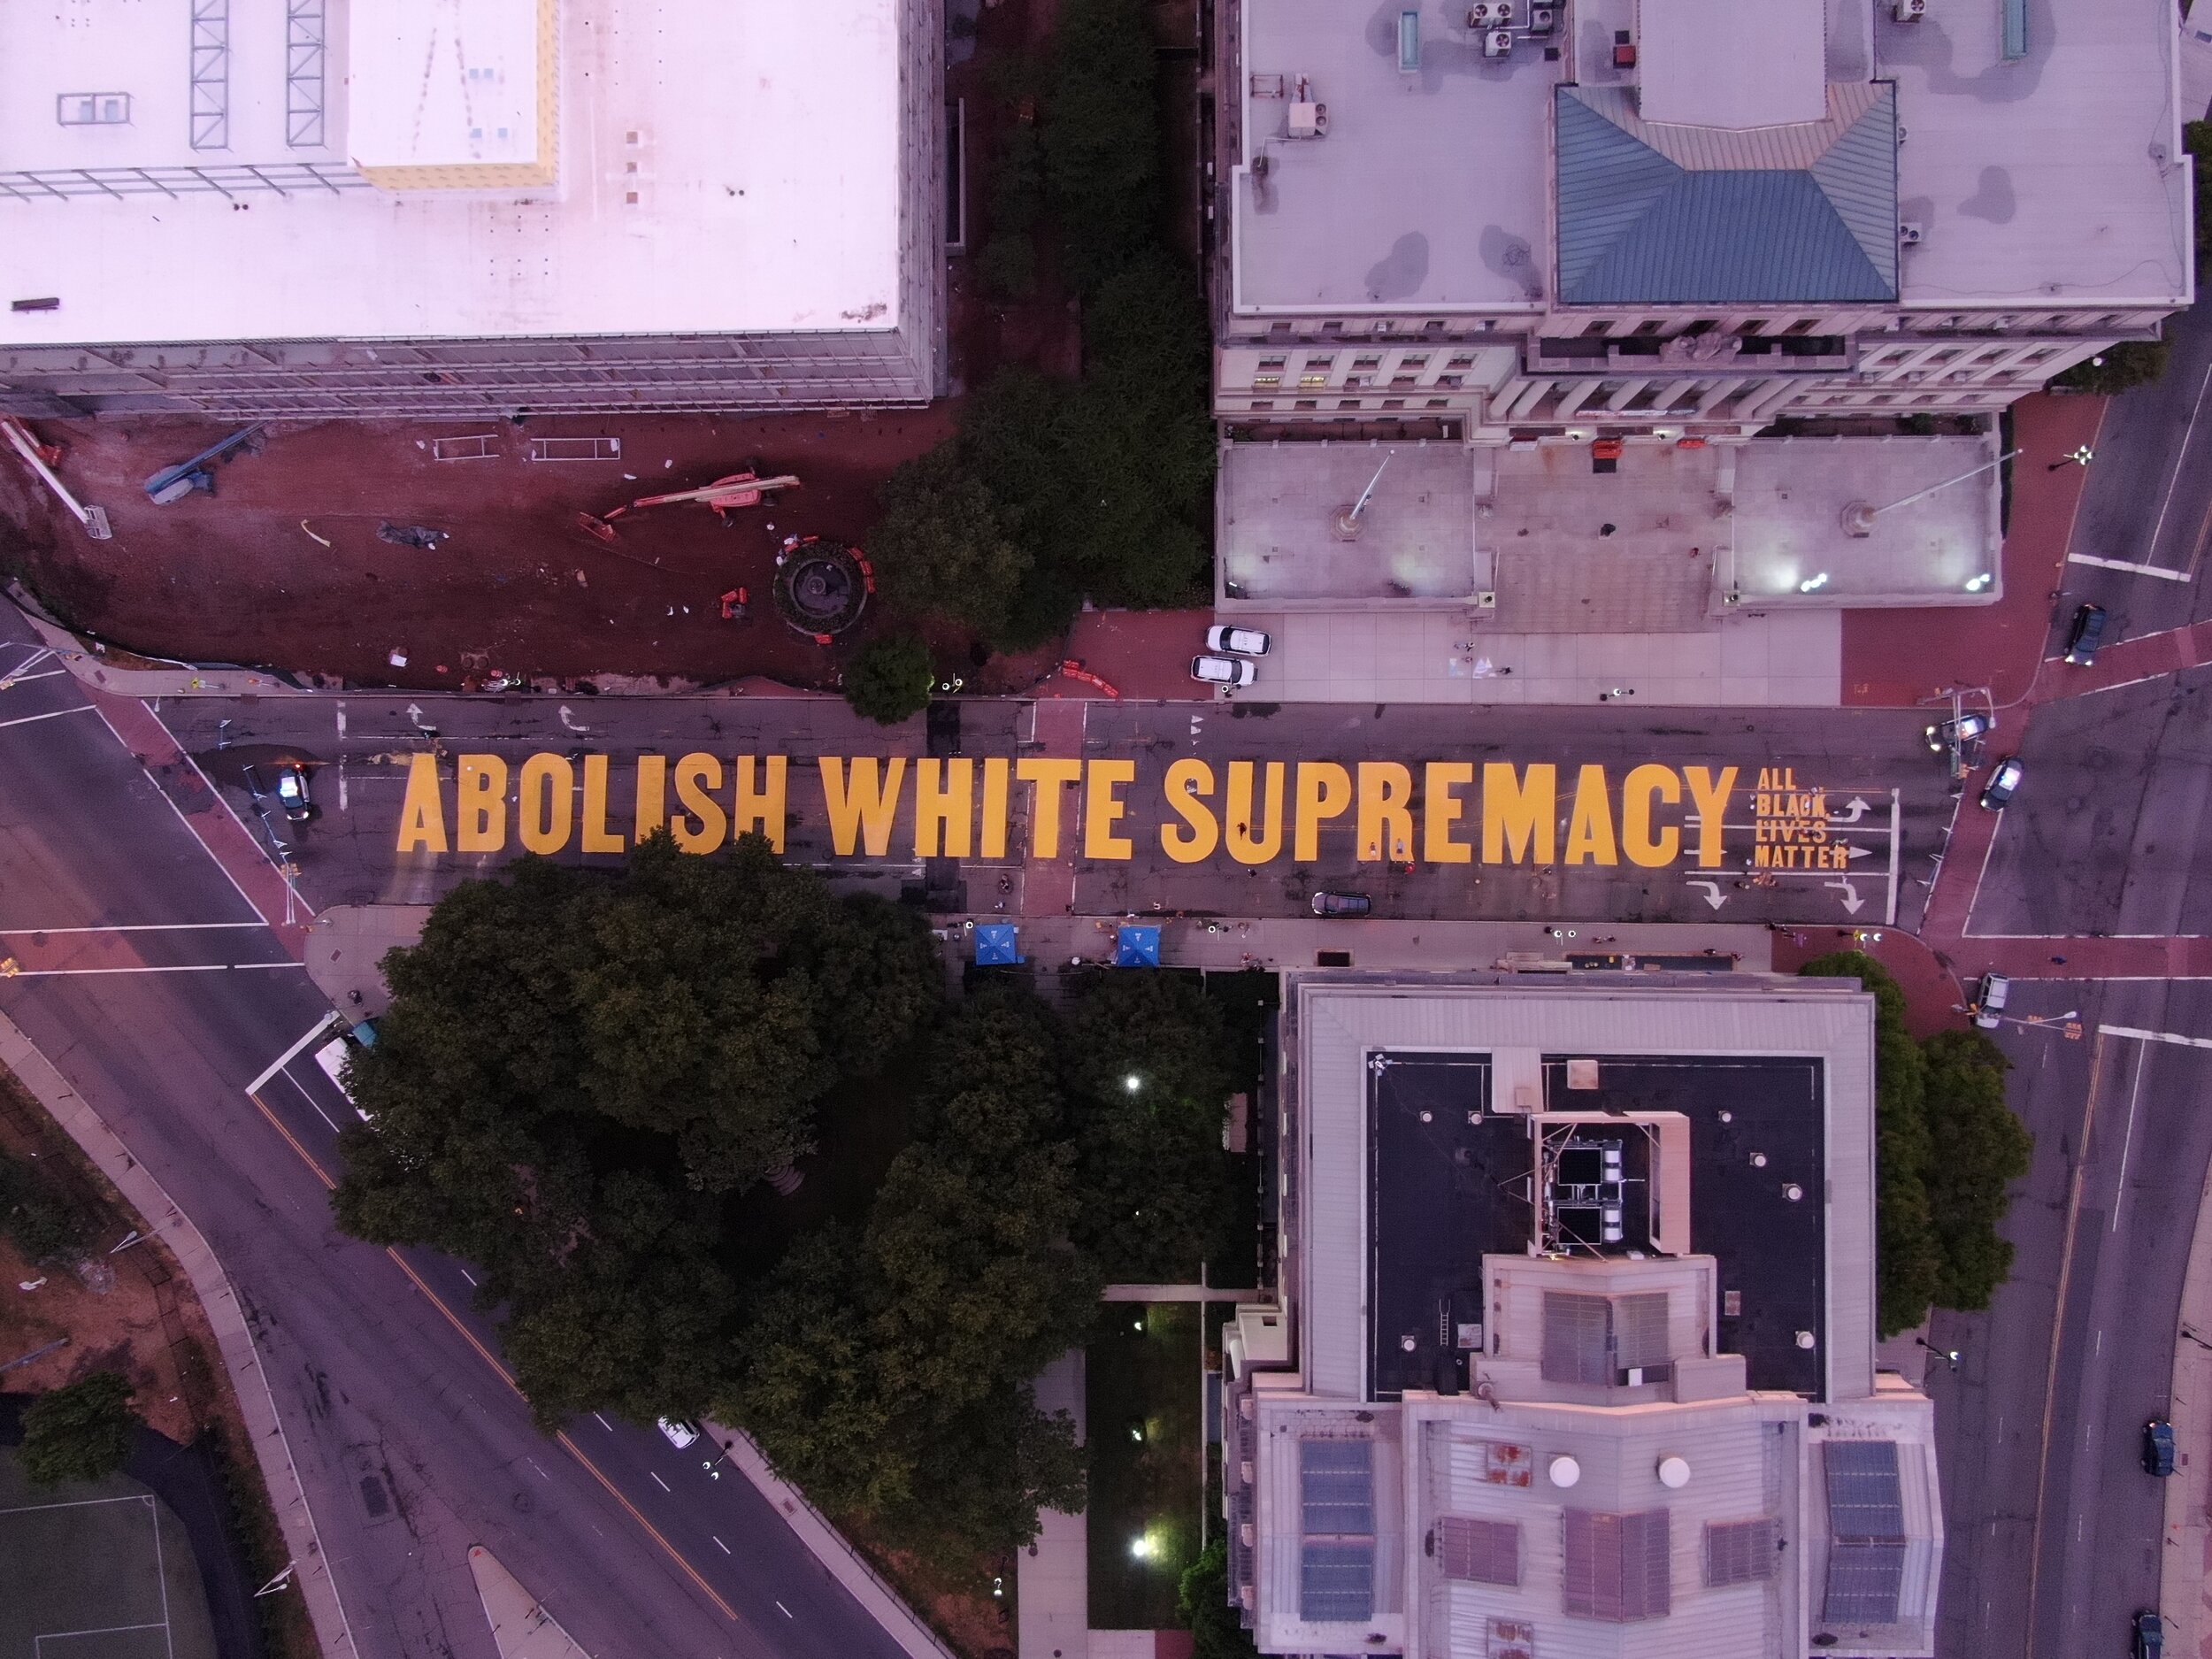 Image for Image of Murals for Justice: Newark, “Abolish White Supremacy” contribution